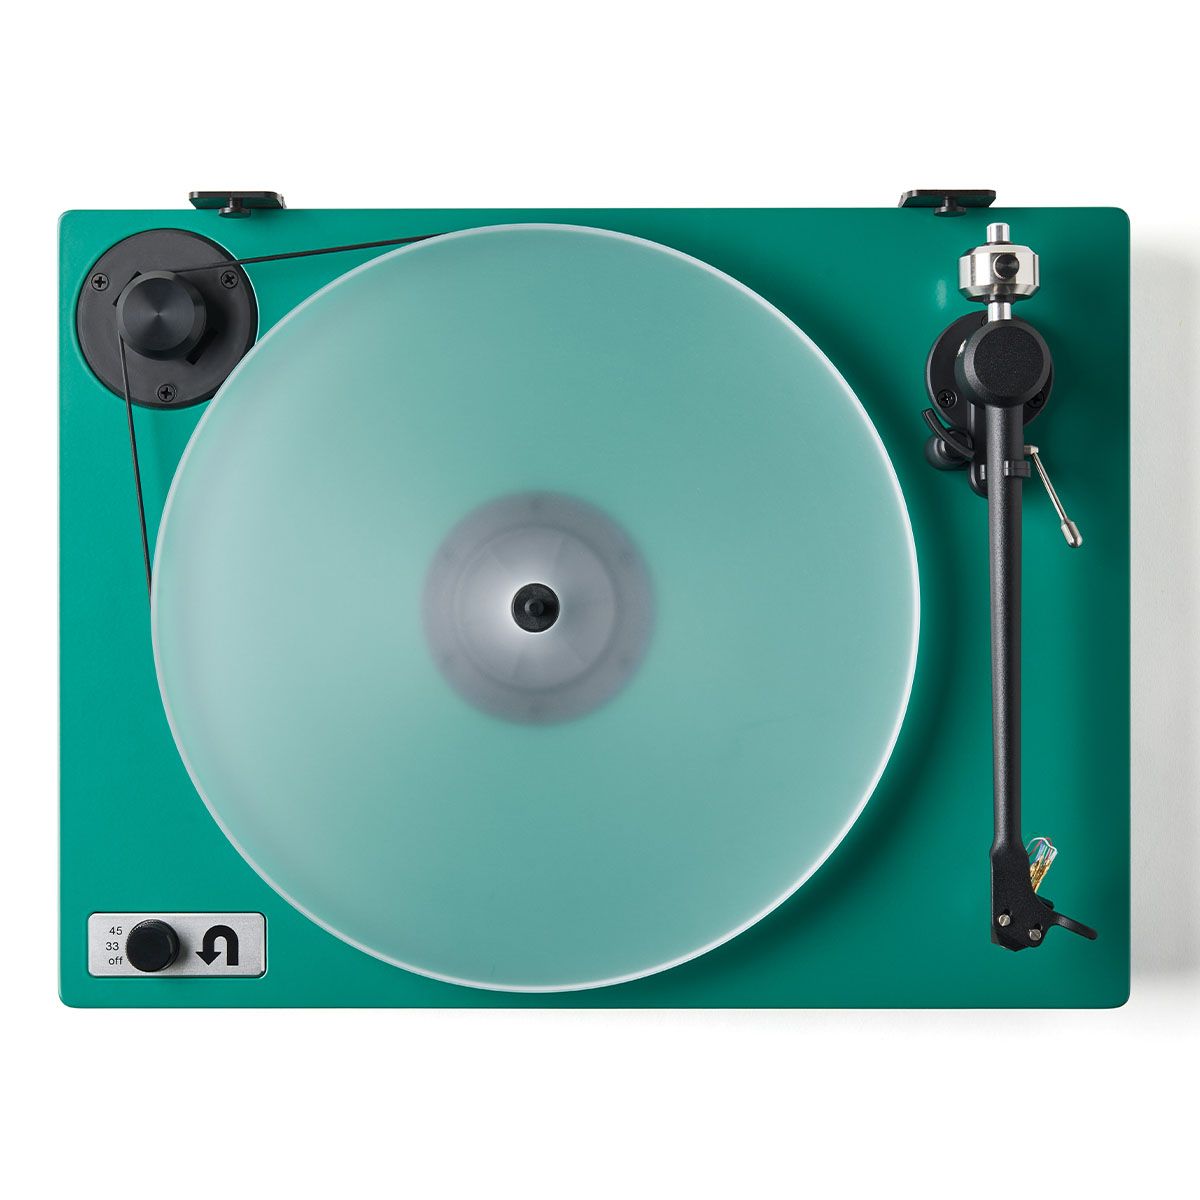 U-Turn Orbit Special Turntable in green photographed from the top